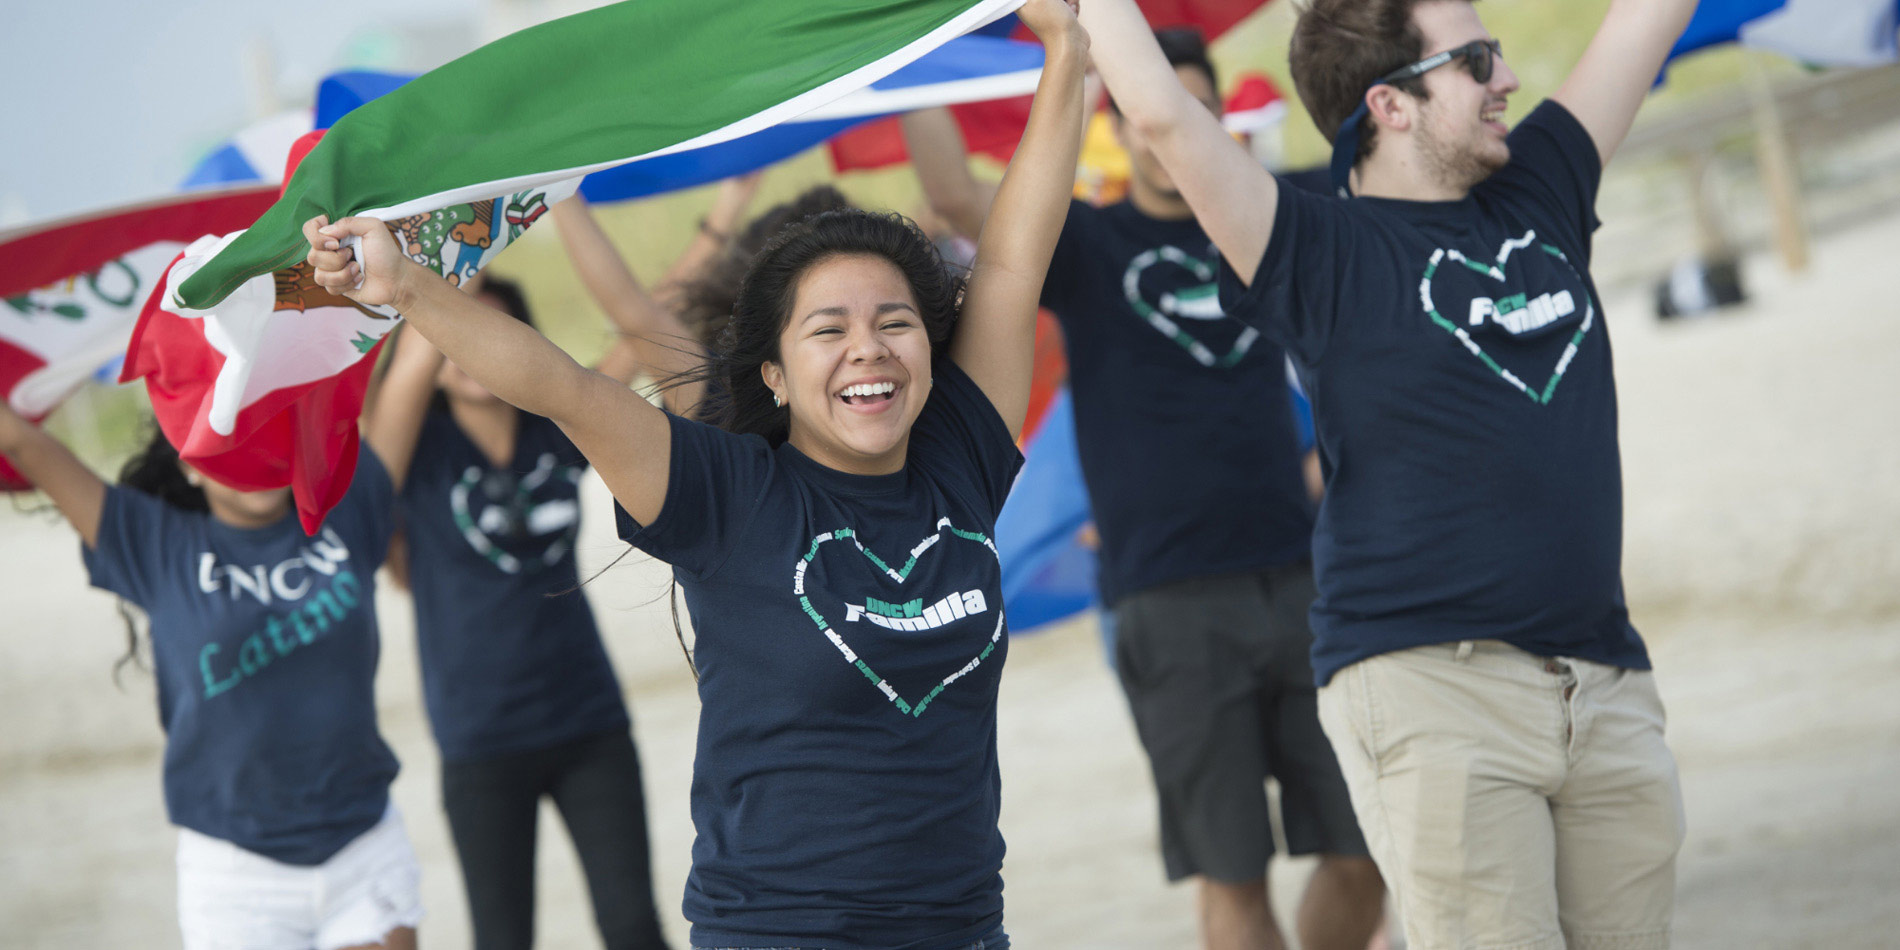 Watson students holding a flag together above their heads running along the beach